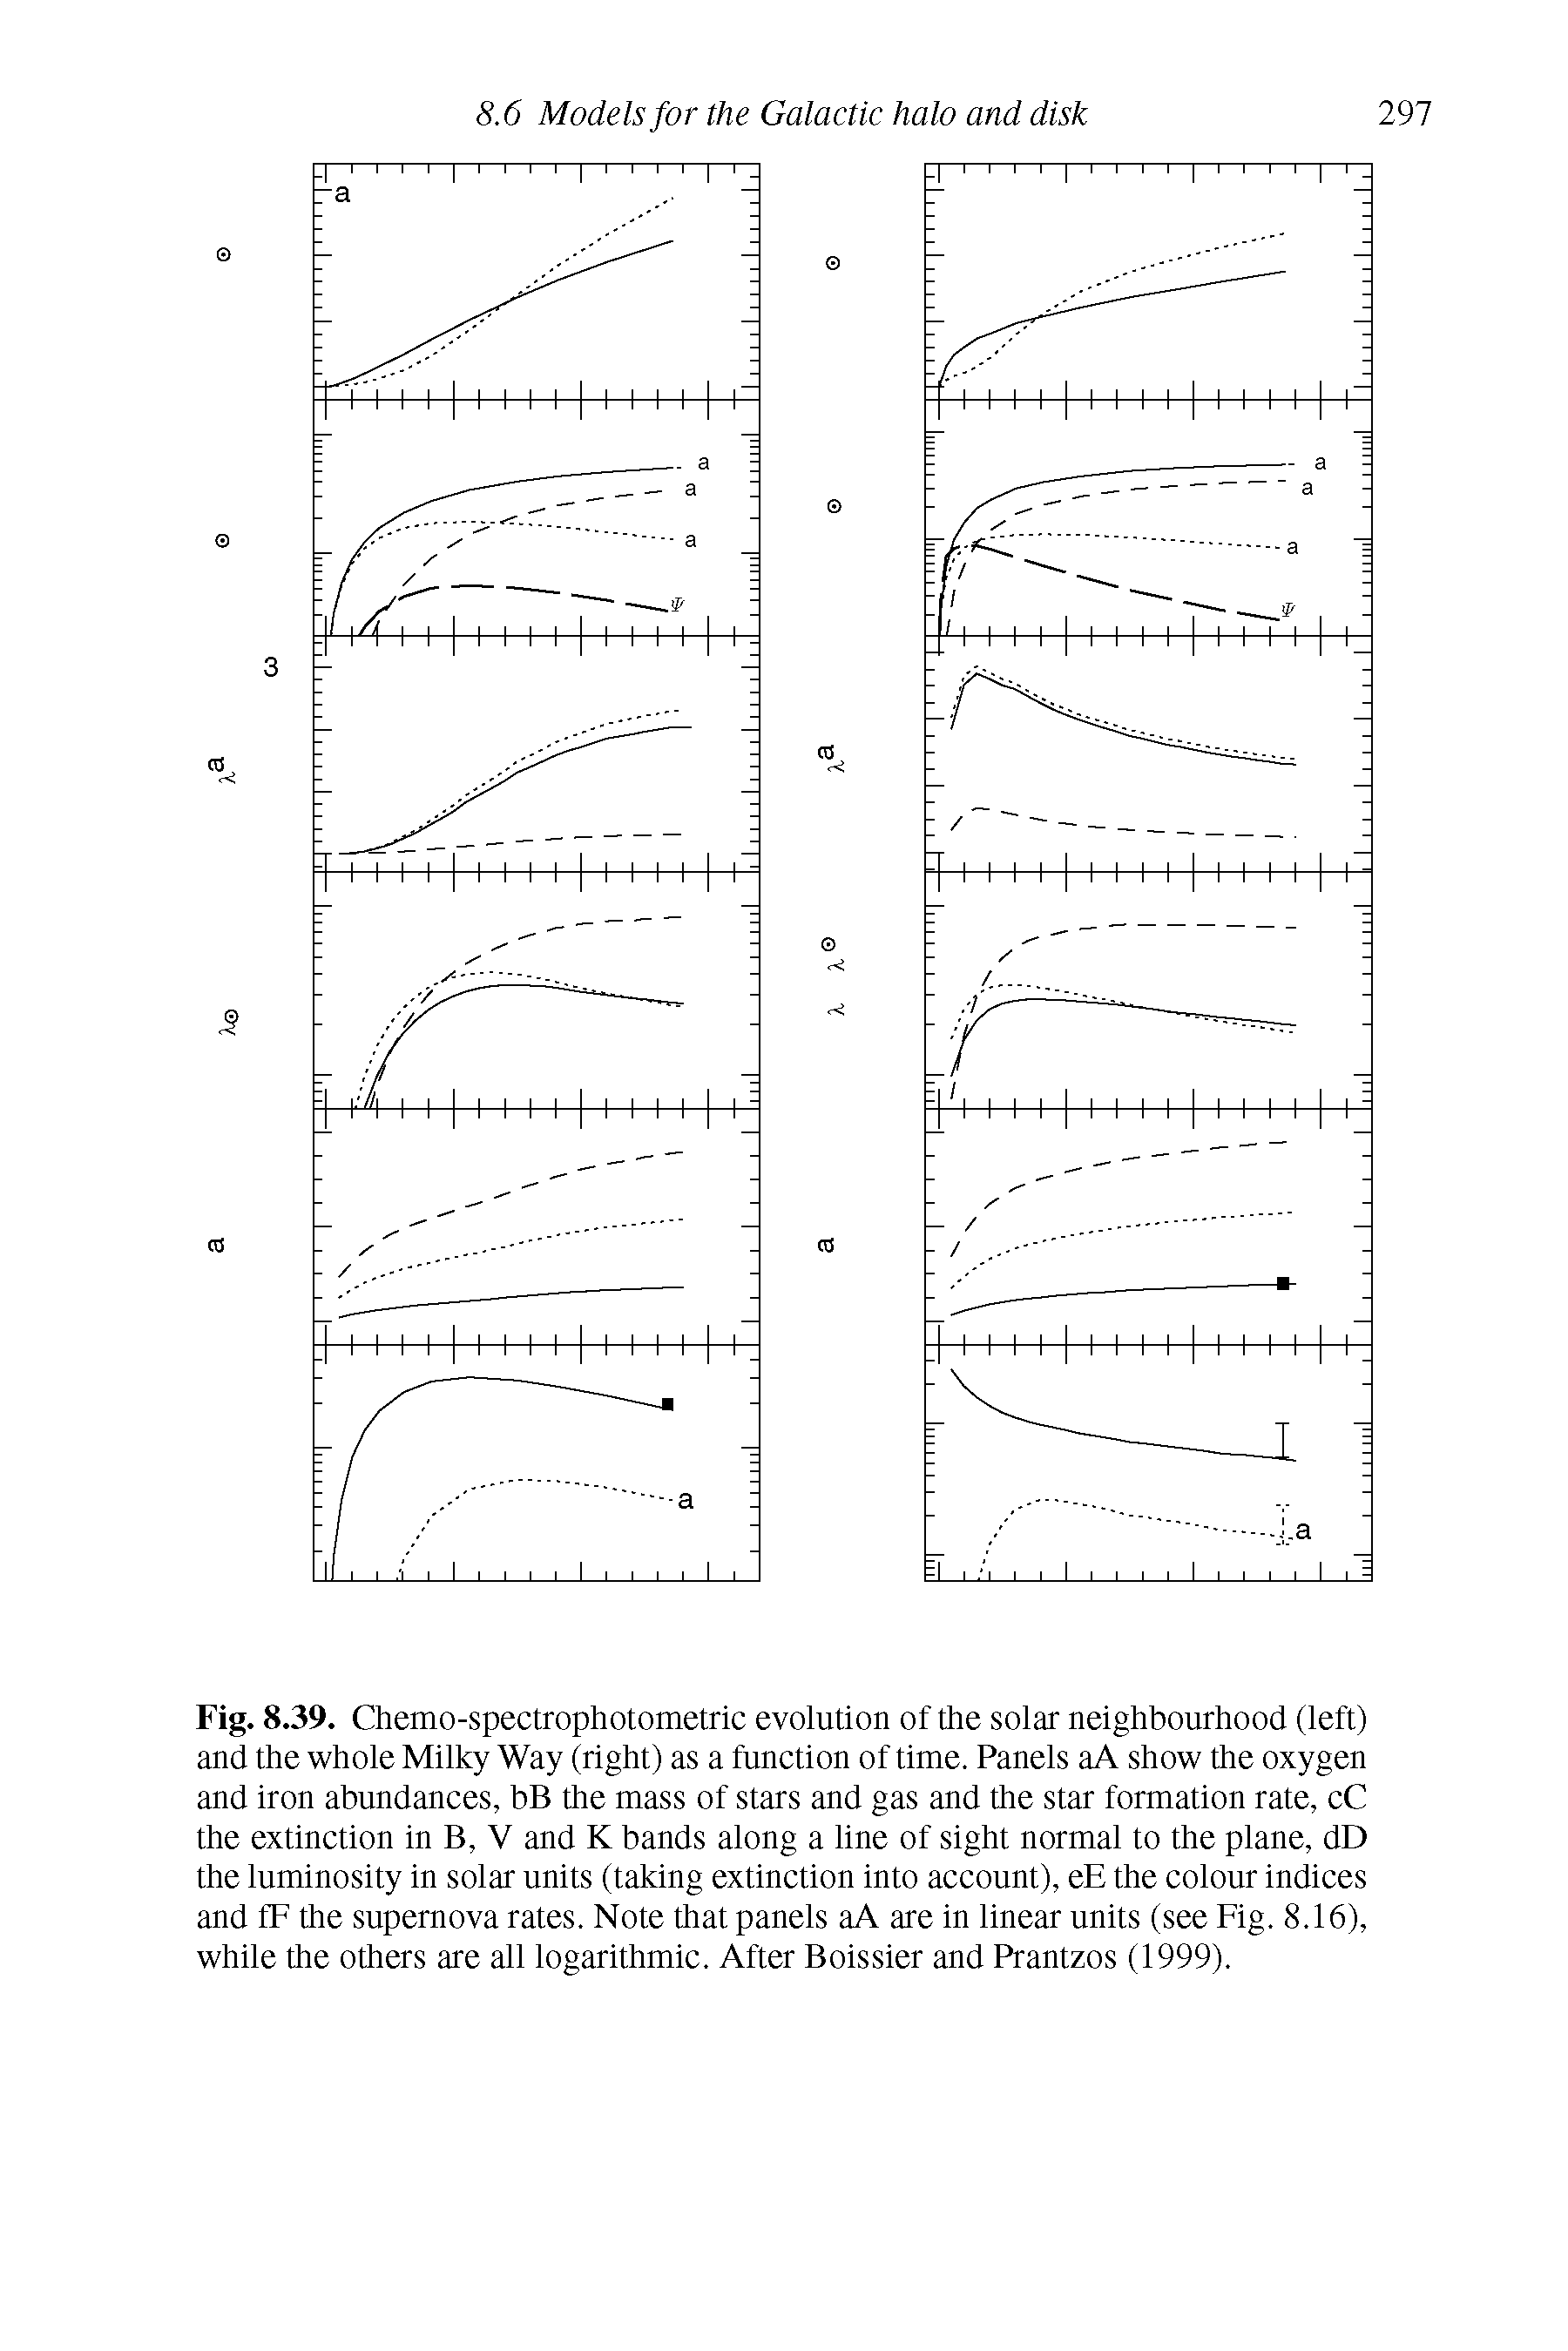 Fig. 8.39. Chemo-spectrophotometric evolution of the solar neighbourhood (left) and the whole Milky Way (right) as a function of time. Panels aA show the oxygen and iron abundances, bB the mass of stars and gas and the star formation rate, cC the extinction in B, V and K bands along a line of sight normal to the plane, dD the luminosity in solar units (taking extinction into account), eE the colour indices and fF the supernova rates. Note that panels aA are in linear units (see Fig. 8.16), while the others are all logarithmic. After Boissier and Prantzos (1999).